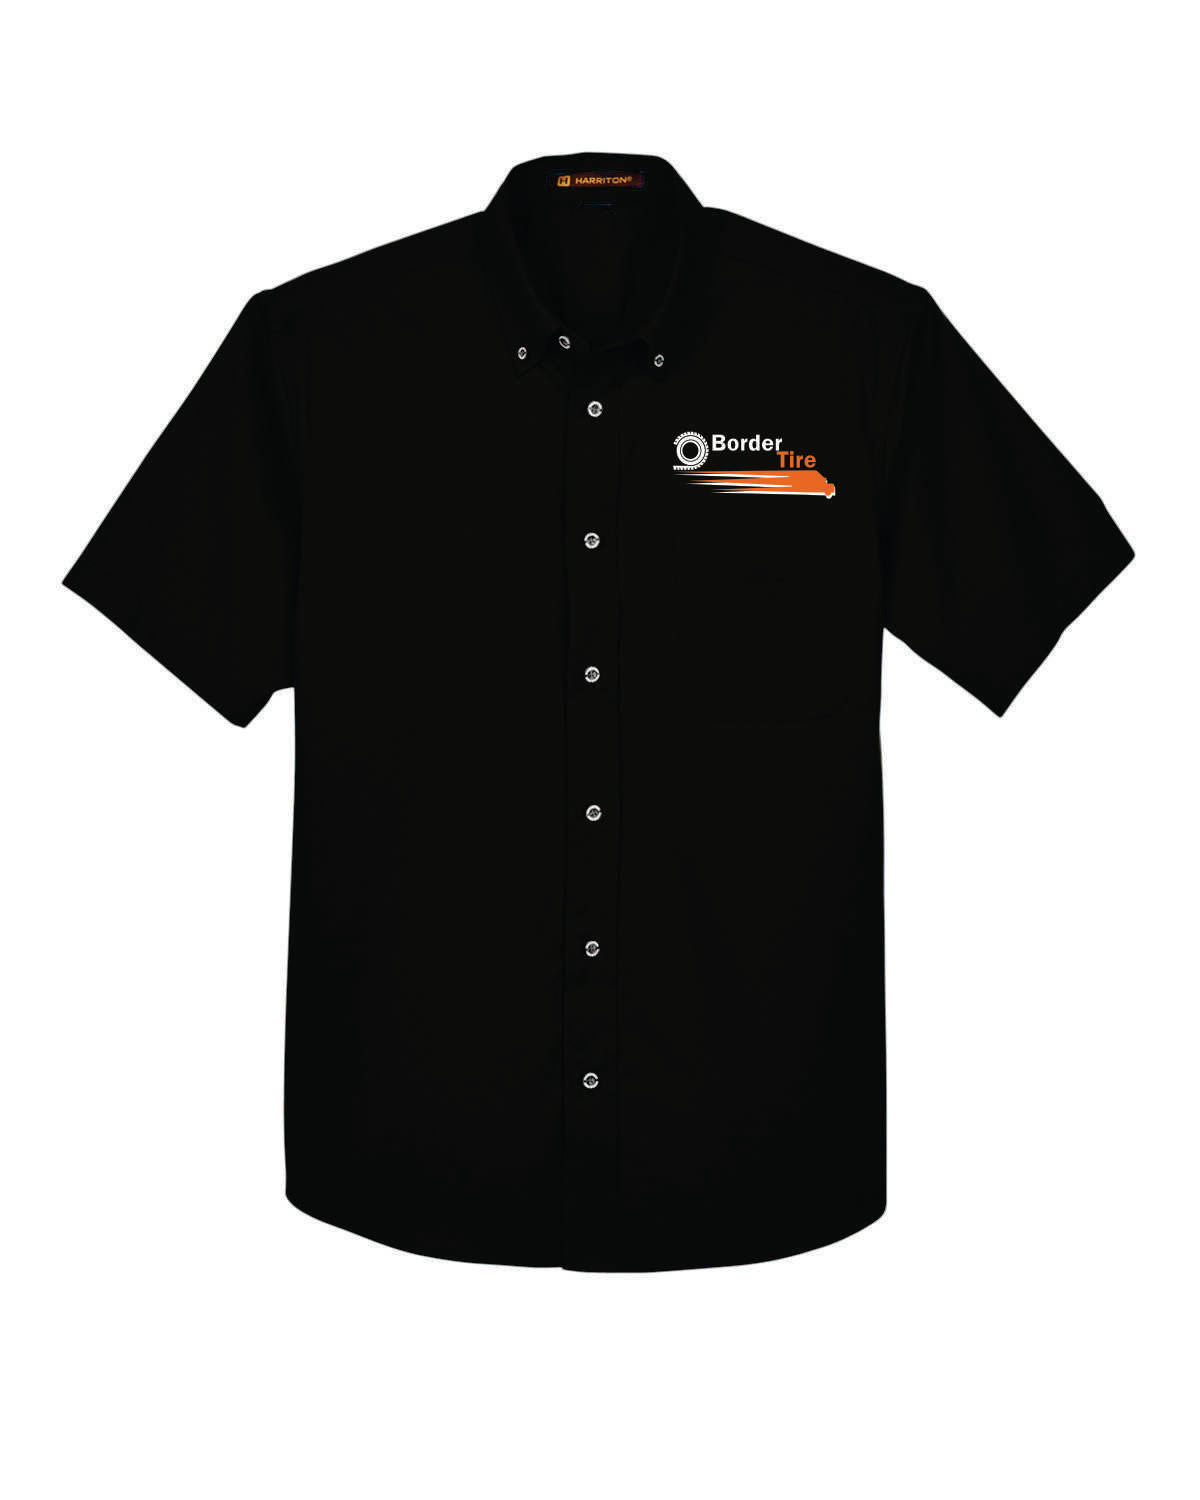 Border Tire Easy Blend™ Short-Sleeve Twill Shirt with Stain-Release